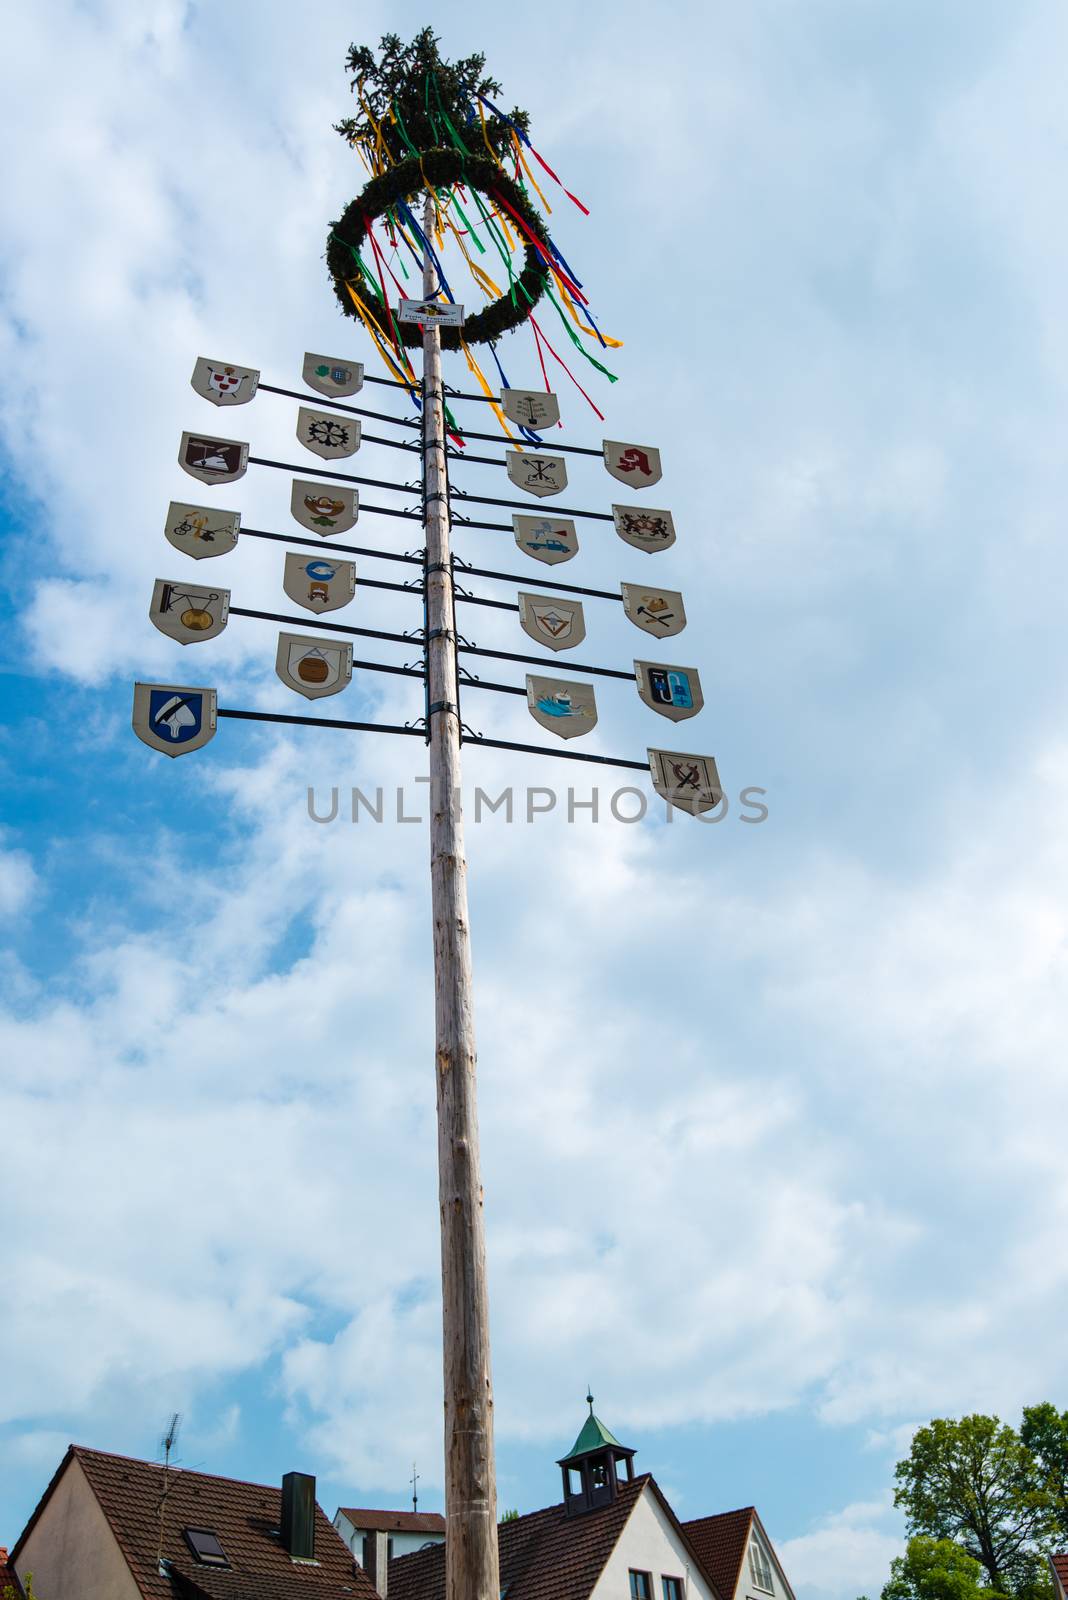 OSTFILDERN-SCHARNHAUSEN, GERMANY - MAY 1, 2014 - A newly decorated and mounted maypole with plaques representing the various professions and crafts of the town celebrating the May Day on May, 1,2014 in Ostfildern-Scharnhausen near Stuttgart, Germany.